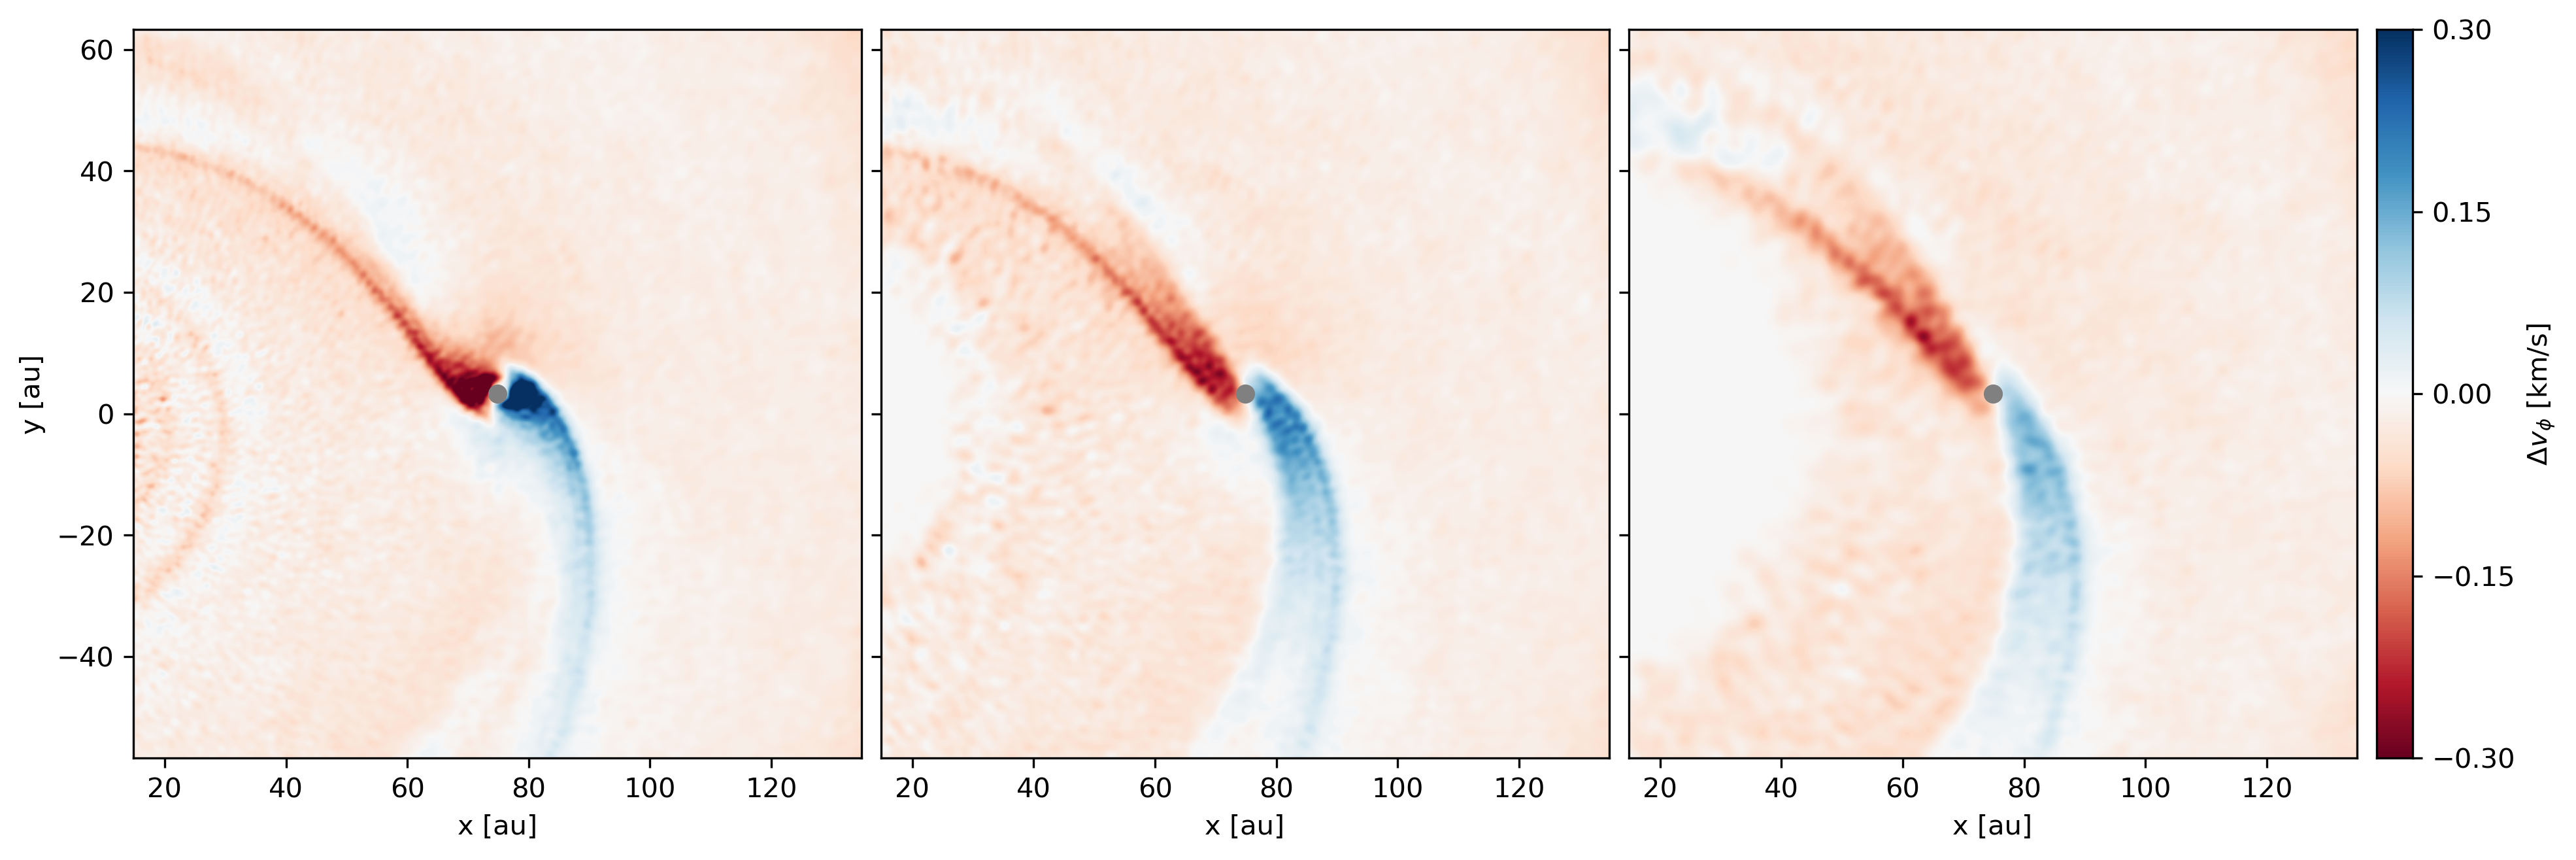 Planet embedded in protoplanetary disc